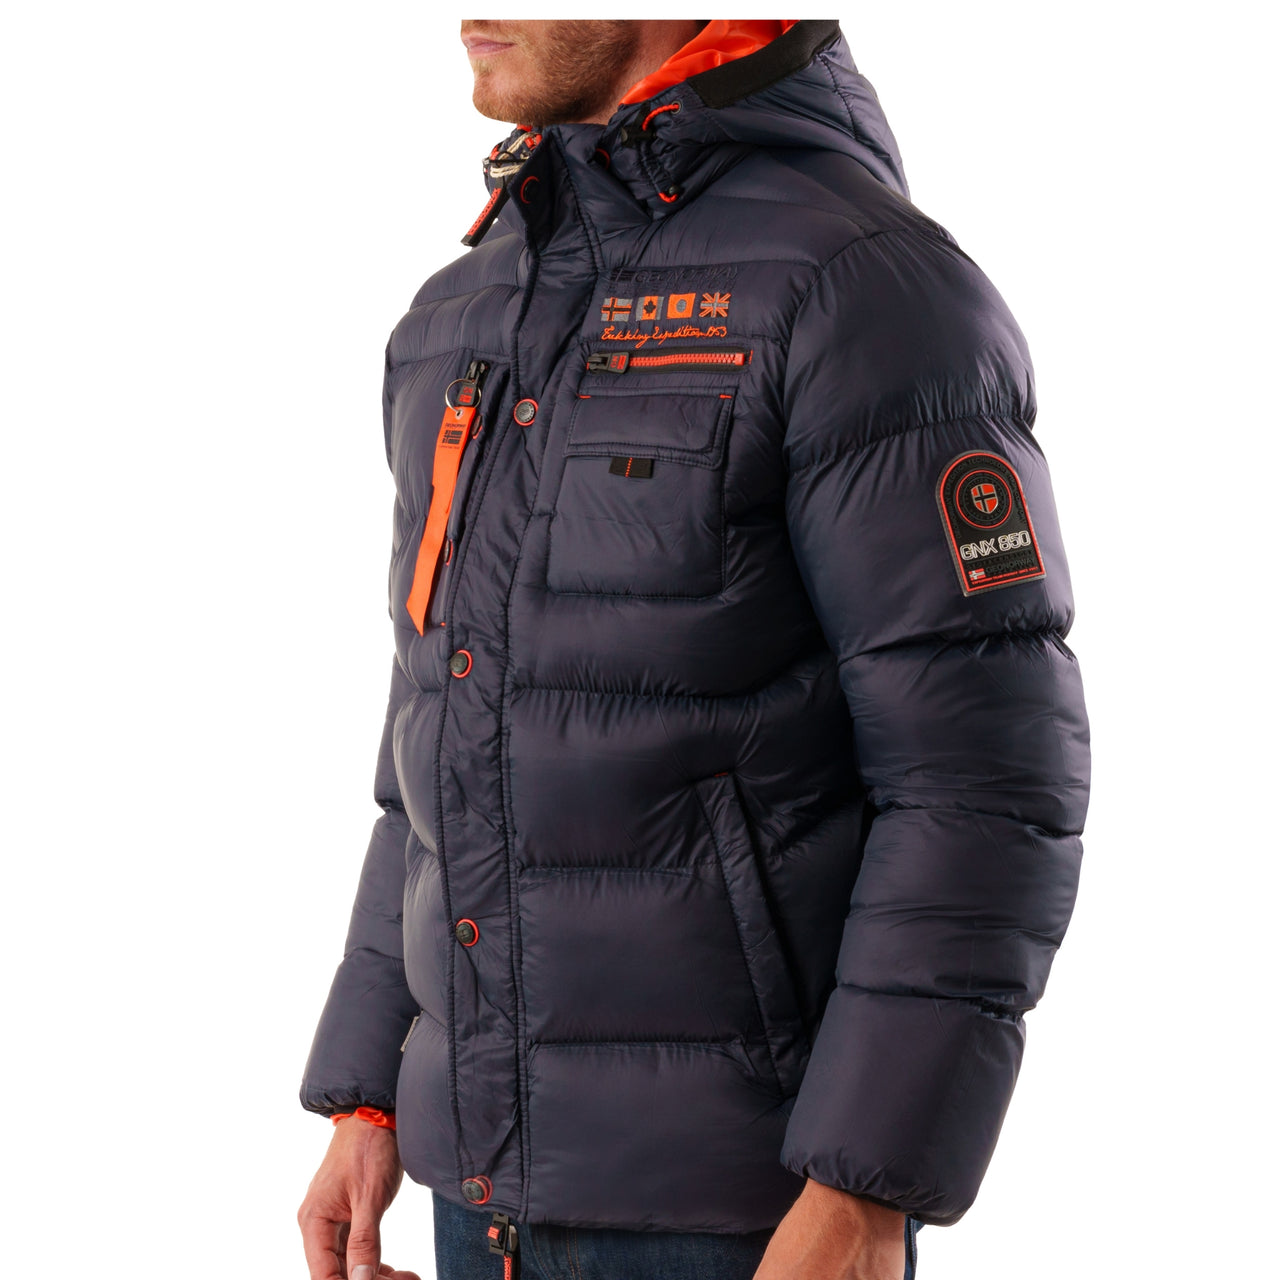 Geographical Norway Chaqueta Acolchada Bolide Gris Oscuro 